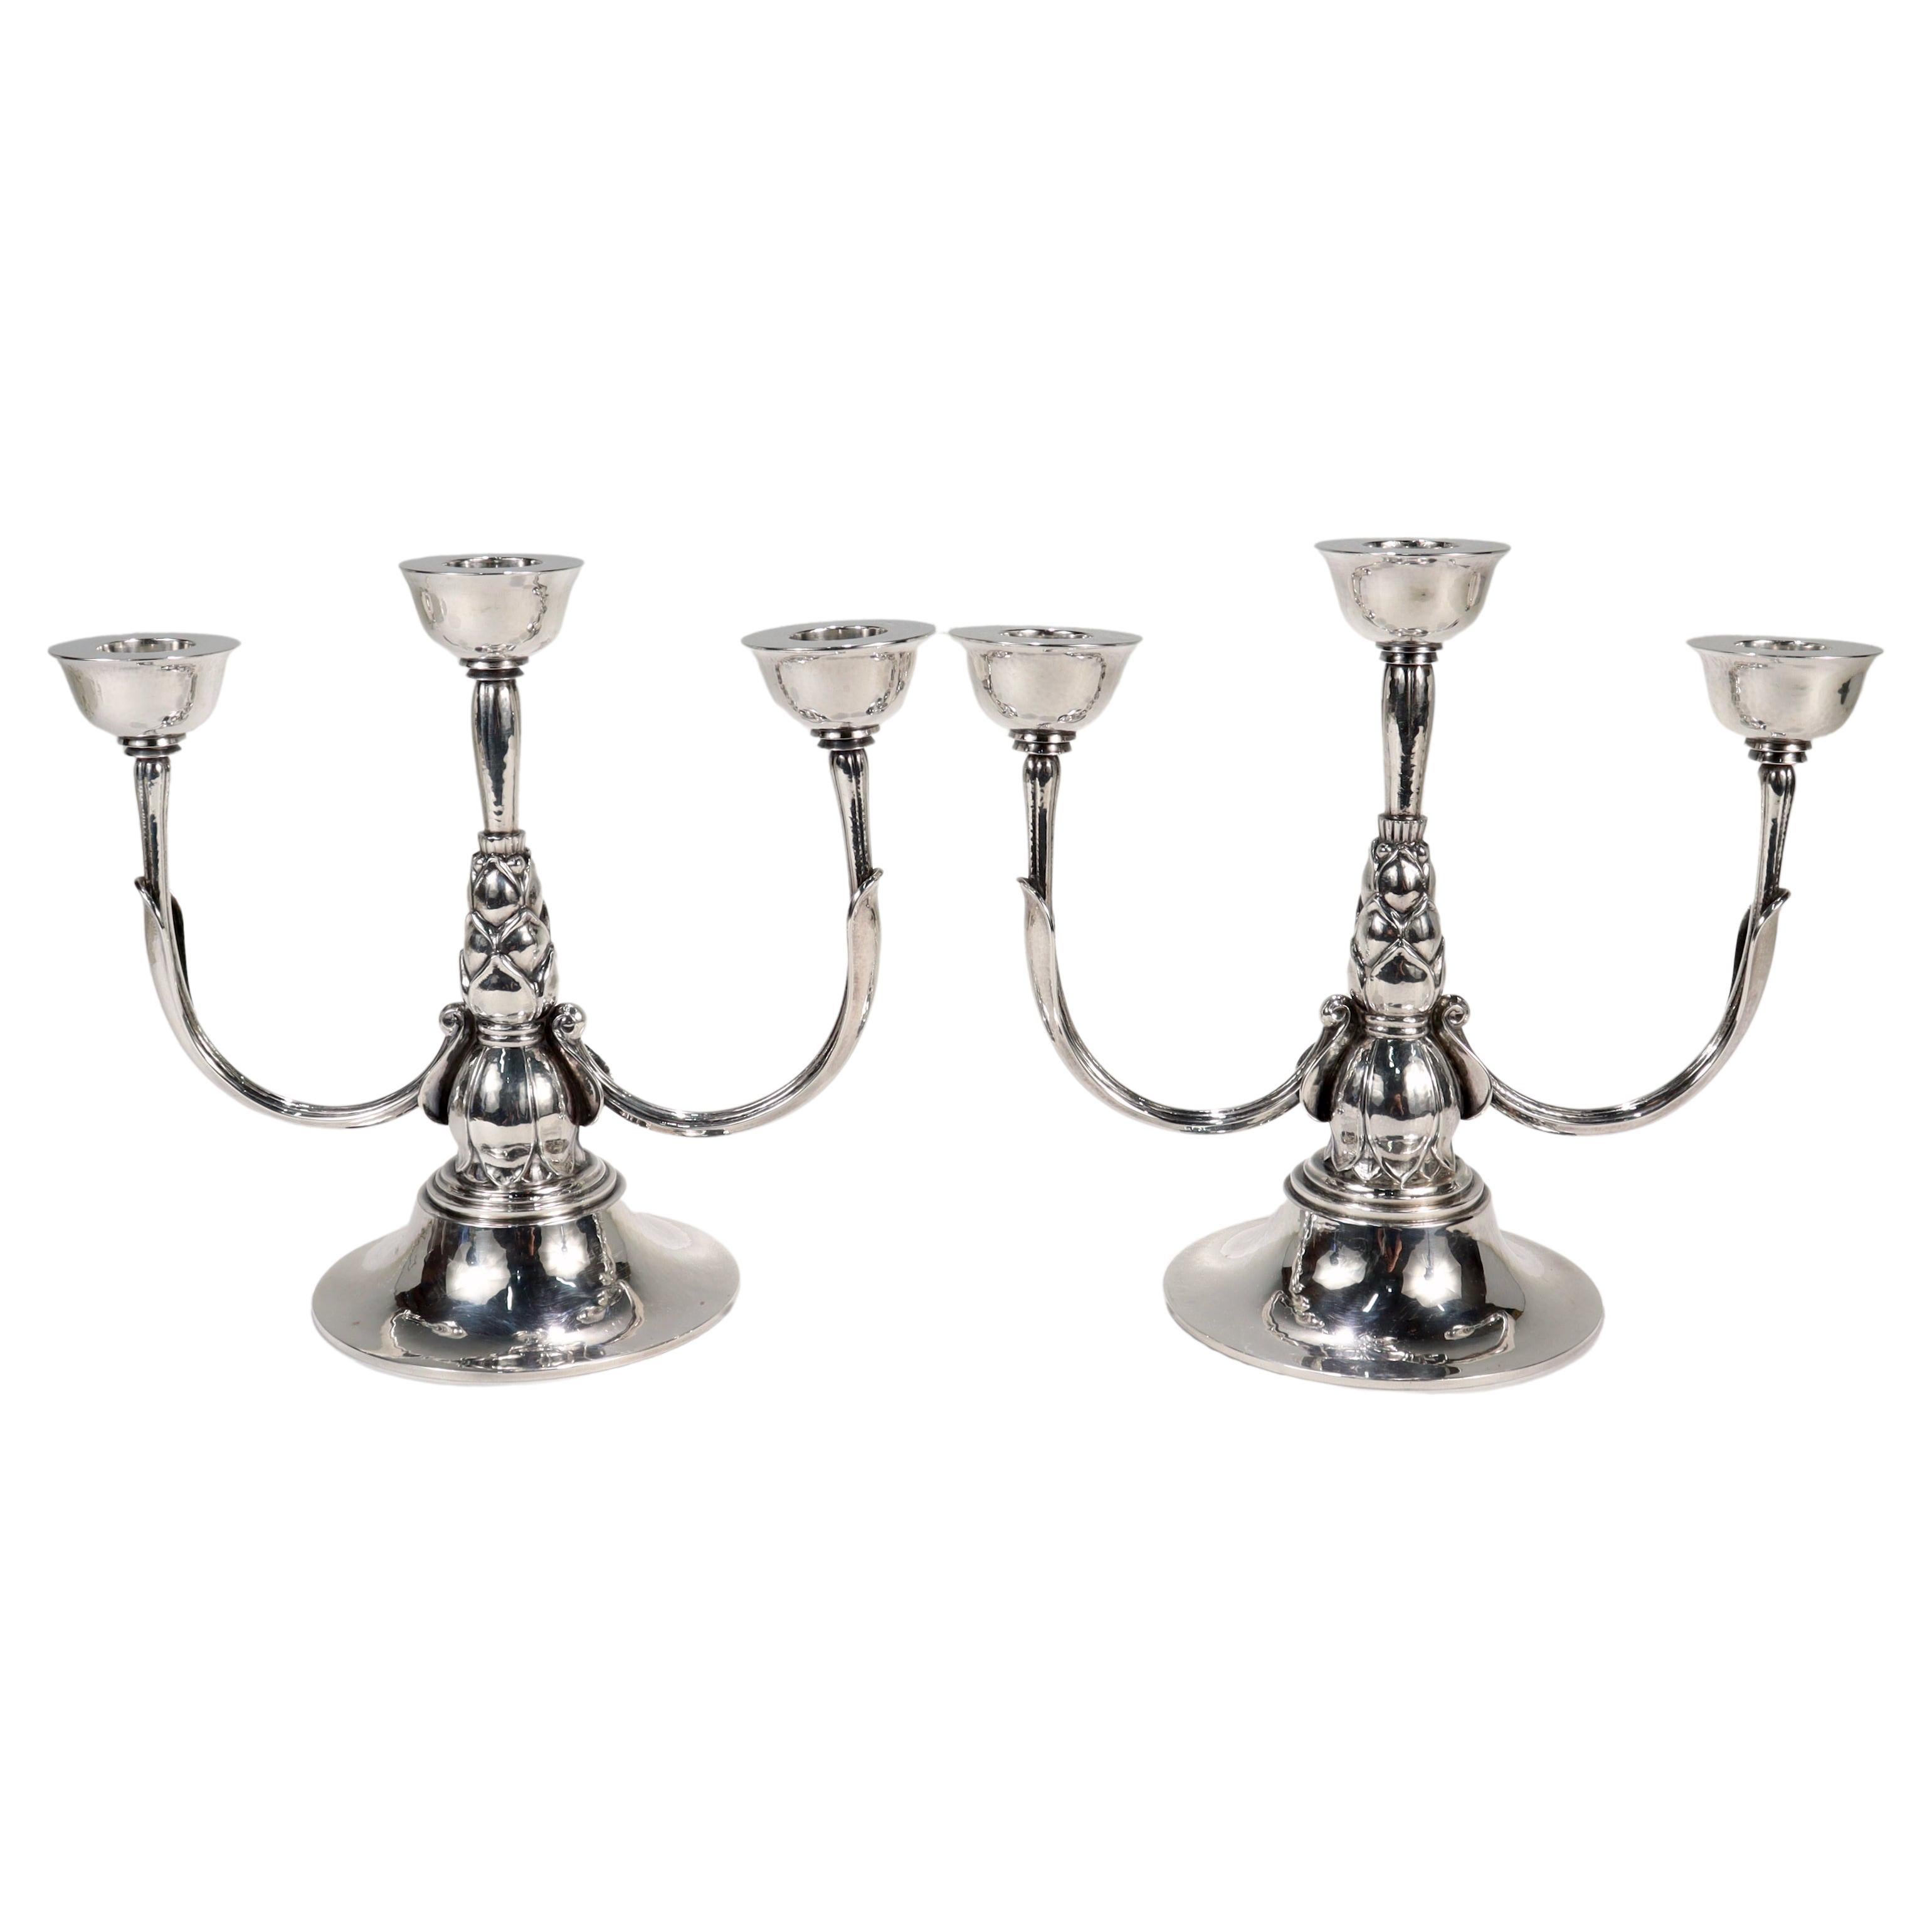 A fine pair of sterling silver candelabra.

By Georg Jensen.

In sterling silver. 

Model No. 537 C. 

Designed by Harald Nielsen. 

Simply a stunning pair of Jensen candelabra! 

Date:
20th Century

Overall Condition:
It is in overall good,